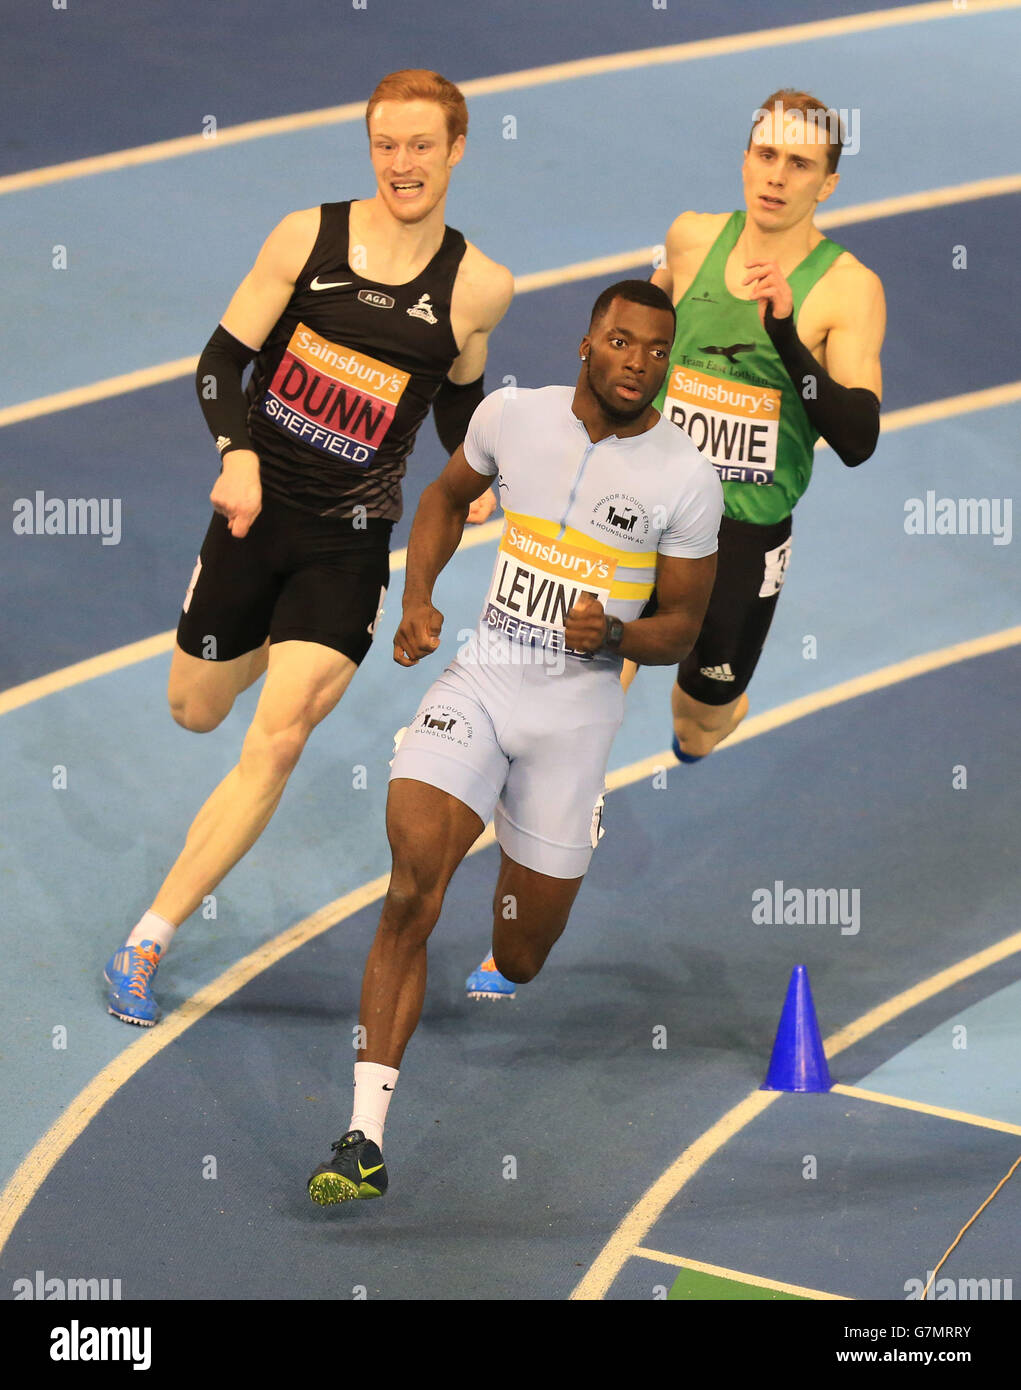 Nigel Levine on his way to winning the mens 200m final during day two of the Sainsbury's British Indoor Championships at the English Institute of Sport, Sheffield. Stock Photo